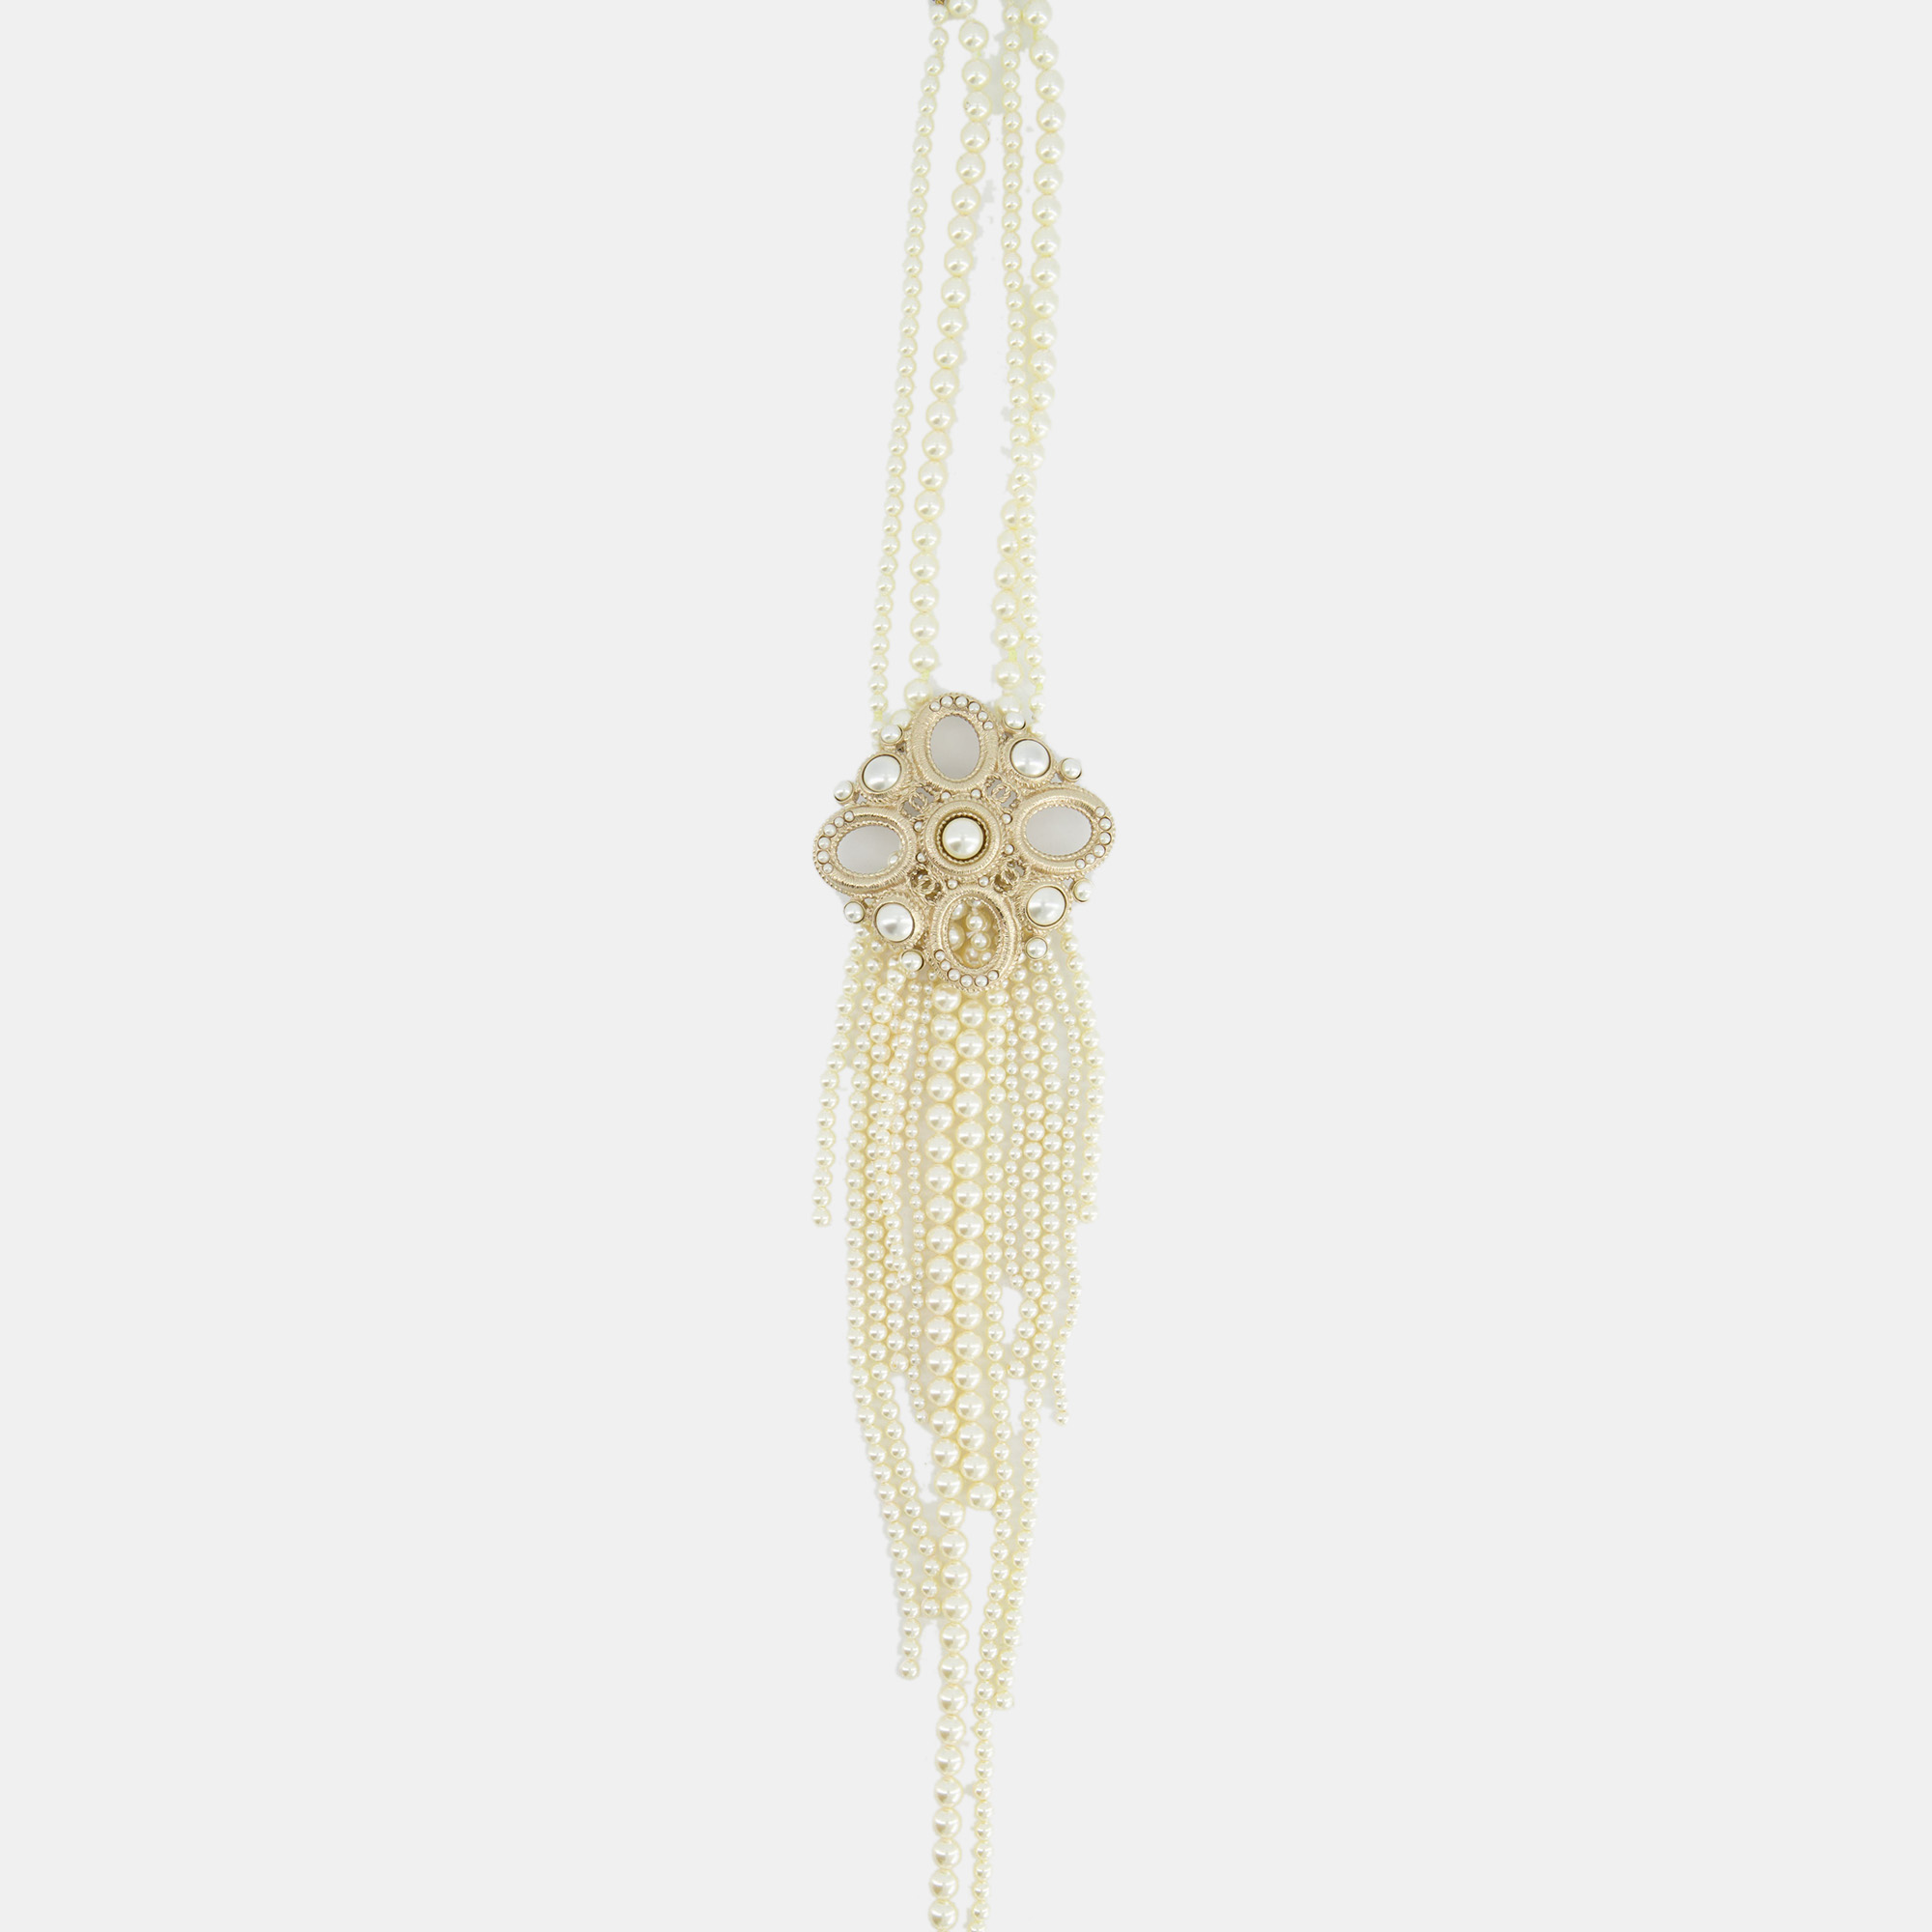 Chanel Choker Long Pearl Necklace With Antique Gold Pendant